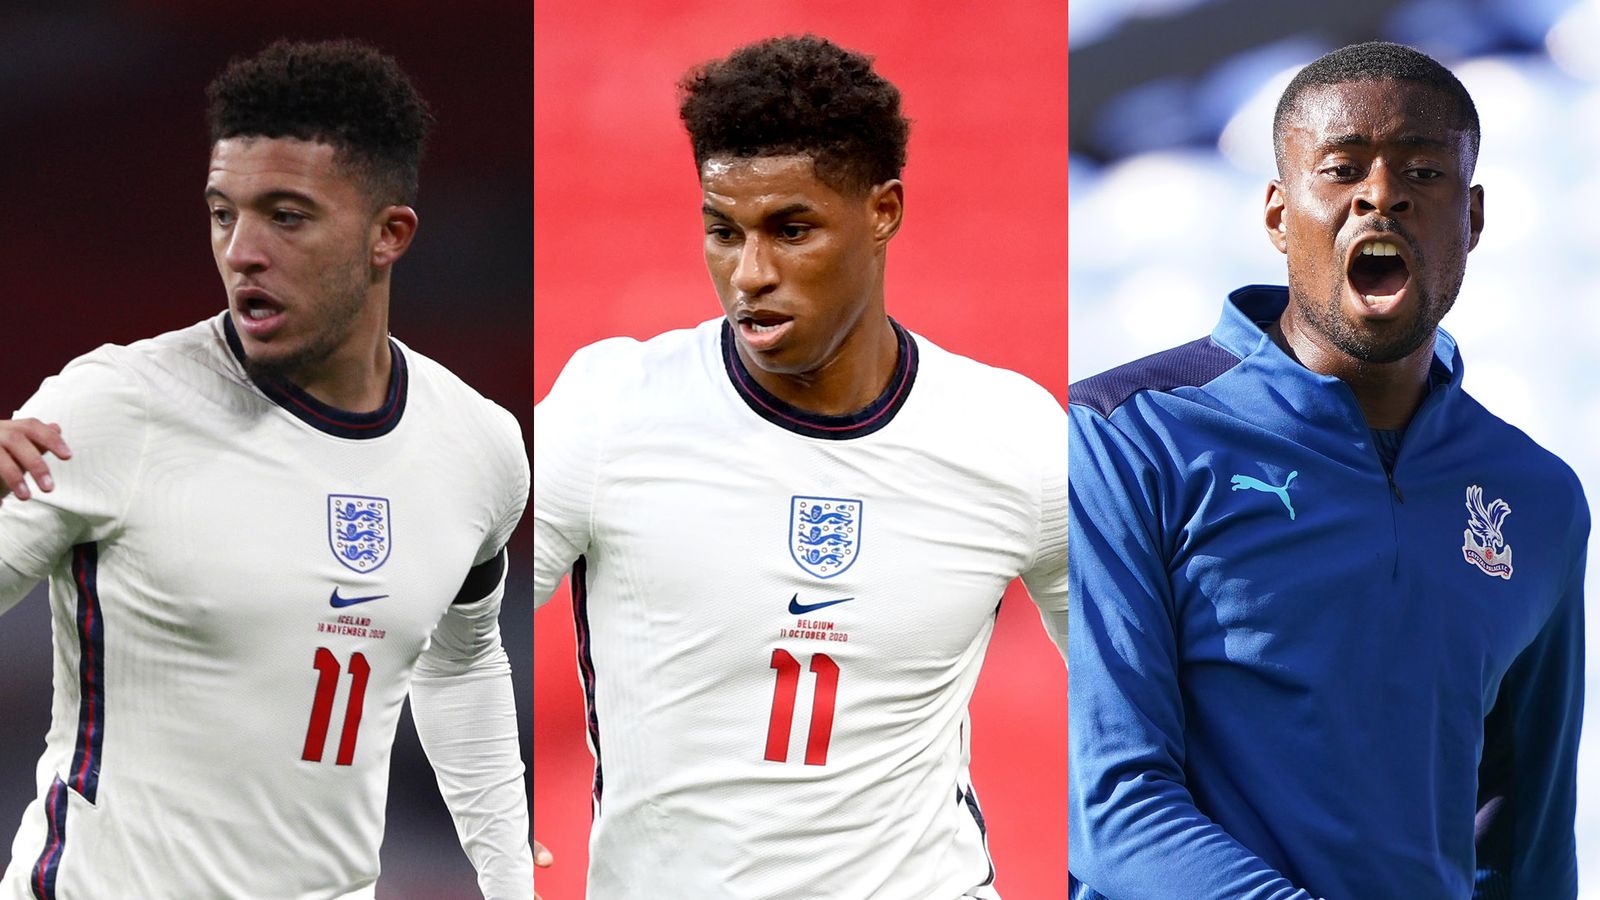 Marcus Rashford and Jadon Sancho not in England squad while Marc Guehi earns first call-up